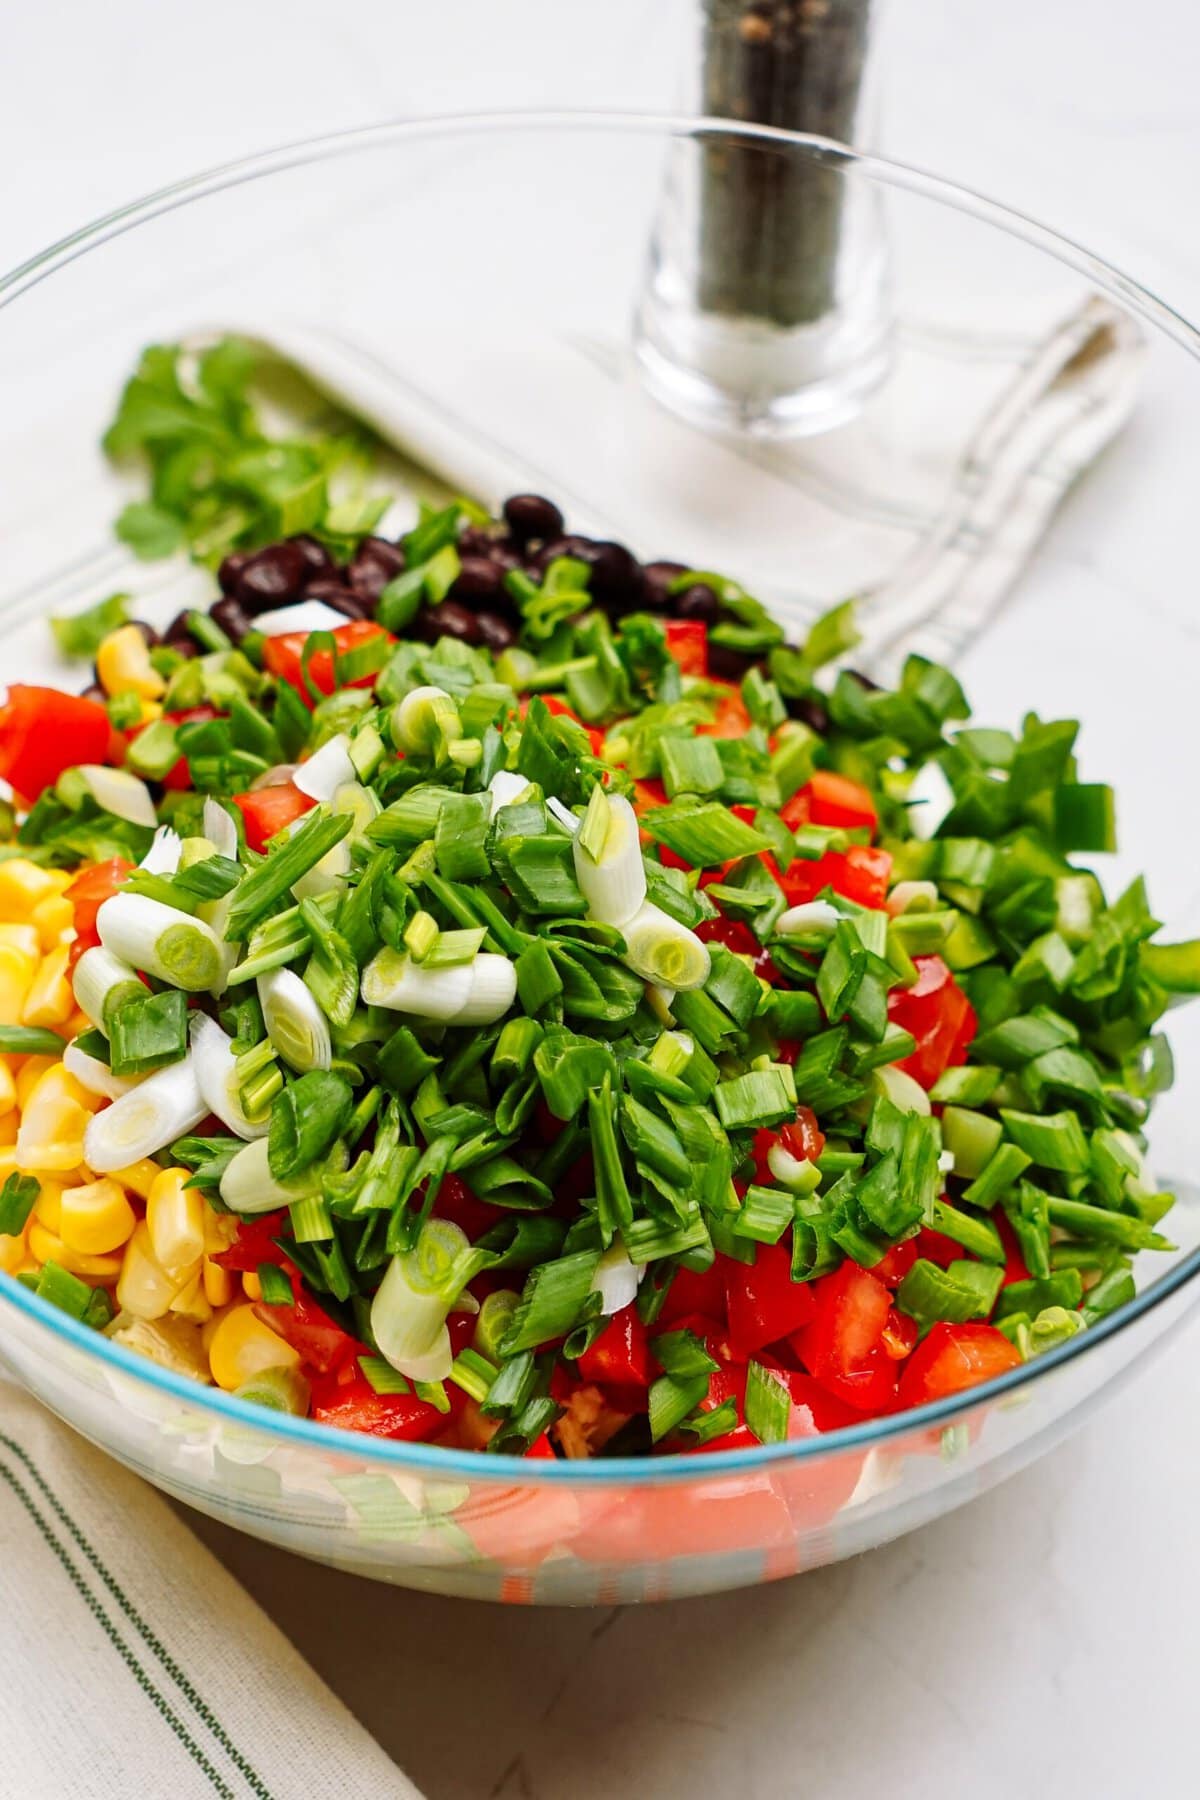 A colorful southwest layered salad with tomatoes, corn, black beans, and chopped green onions in a glass bowl.